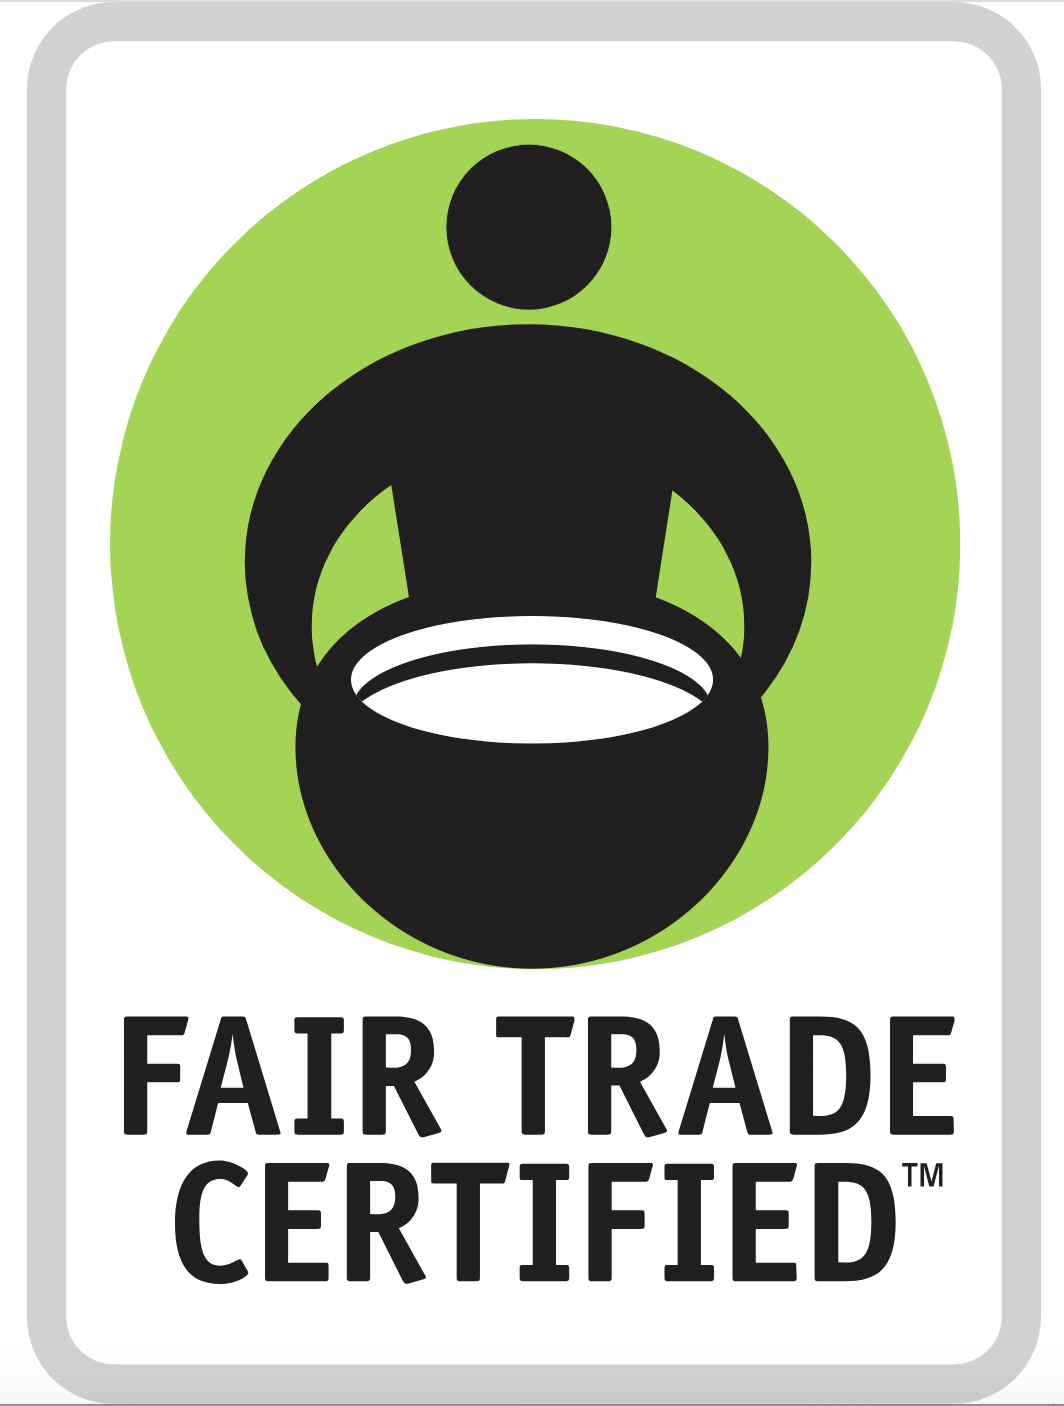 Defining Fair Trade & Why it Matters